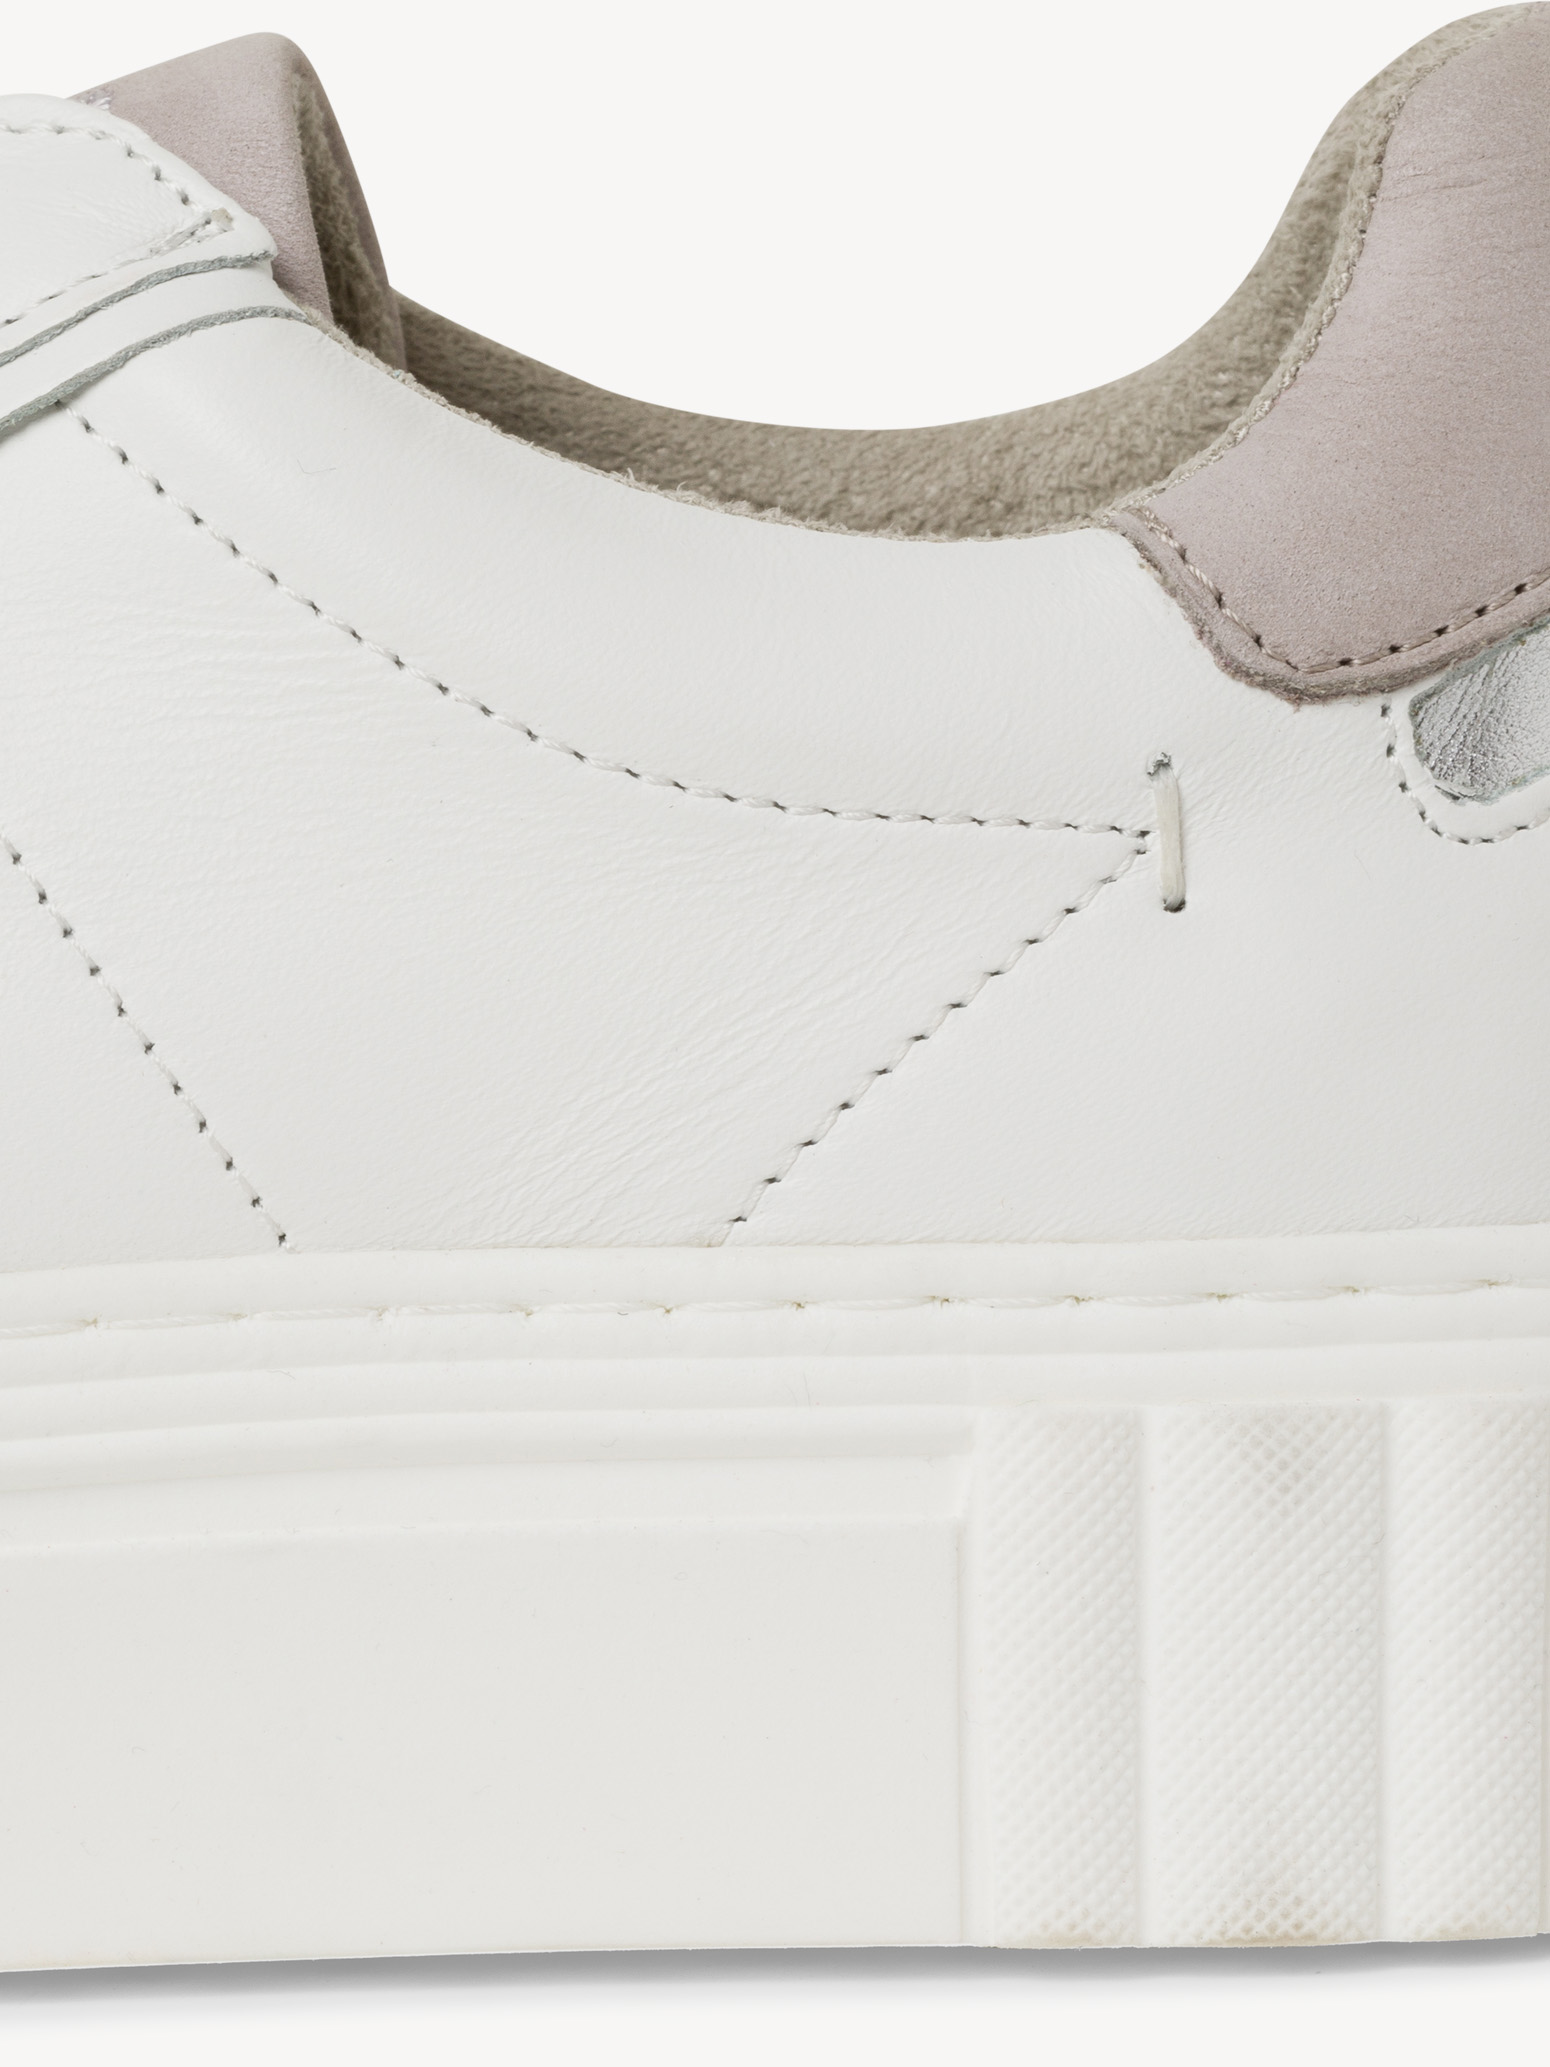 Sneaker - bianco, WHITE LEATHER, hi-res